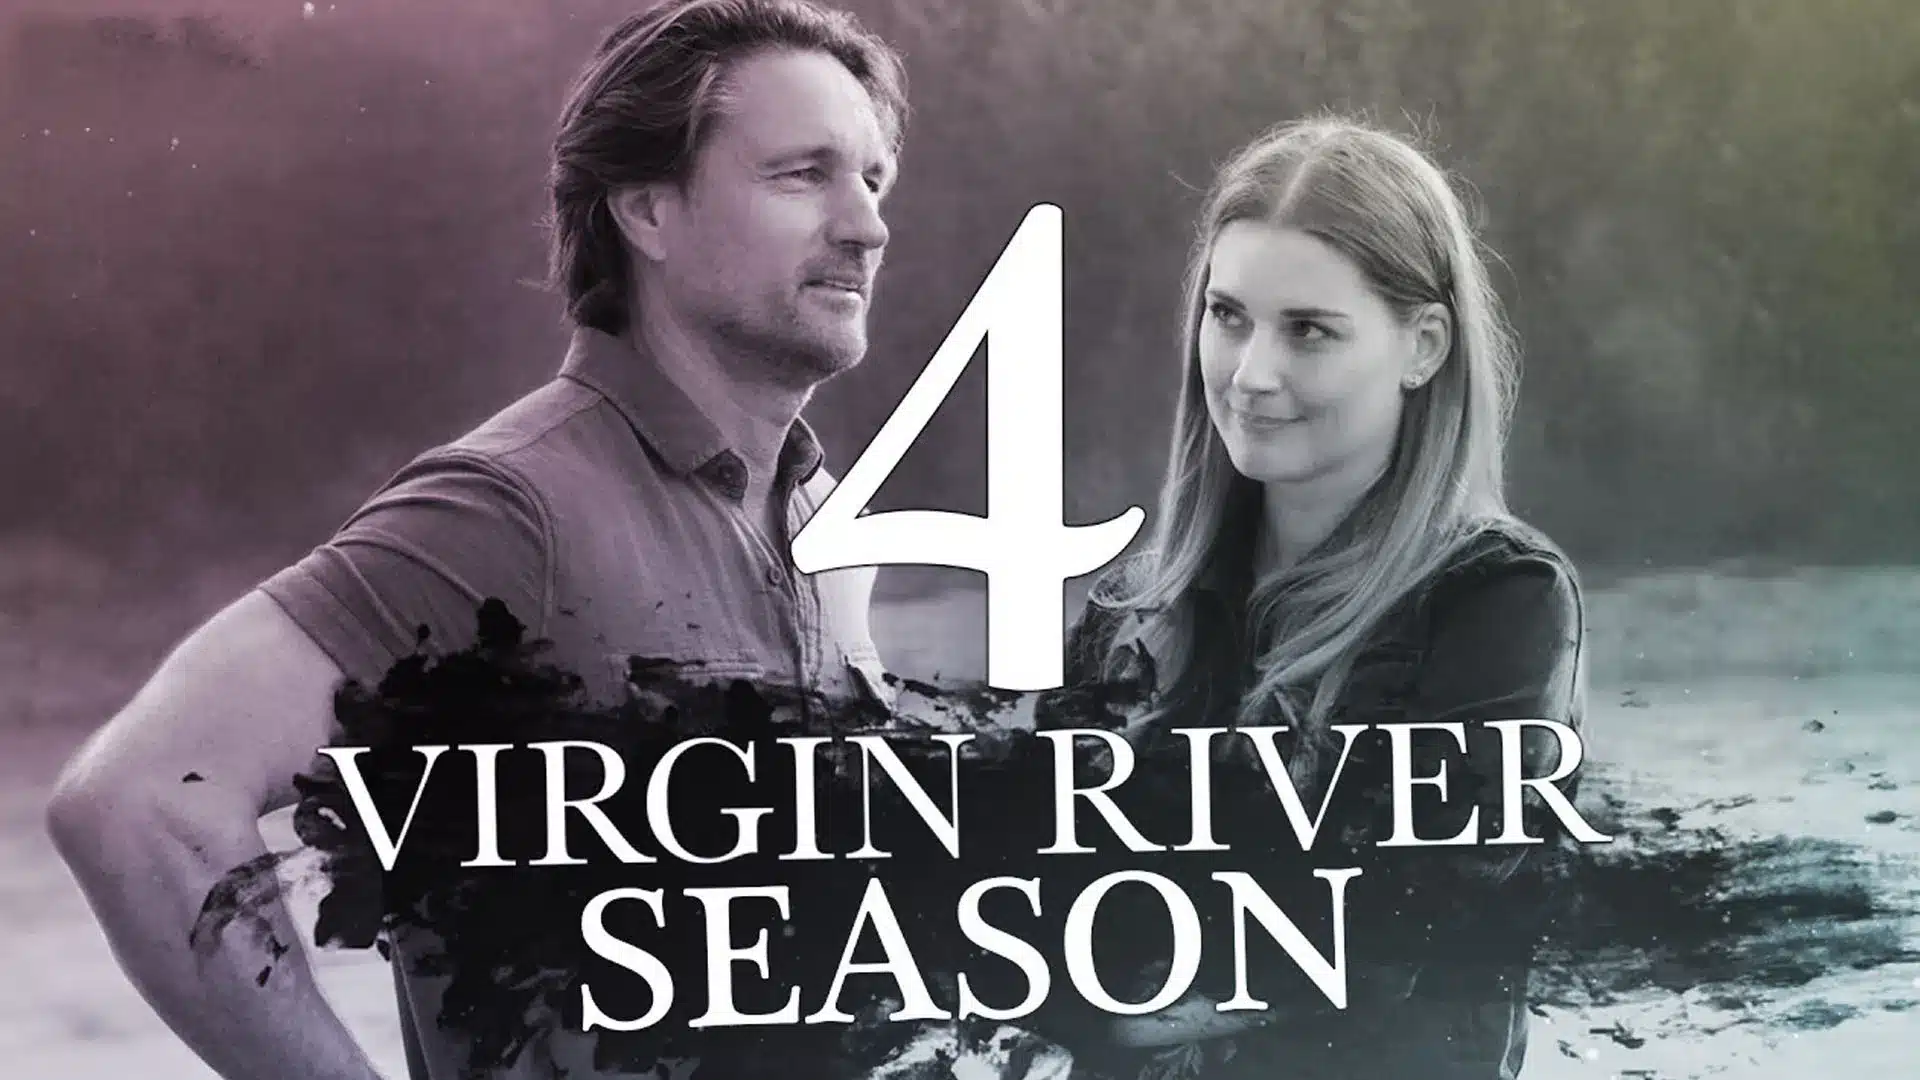 When Will Season 4 Of The Series Come To Netflix? Virgin River